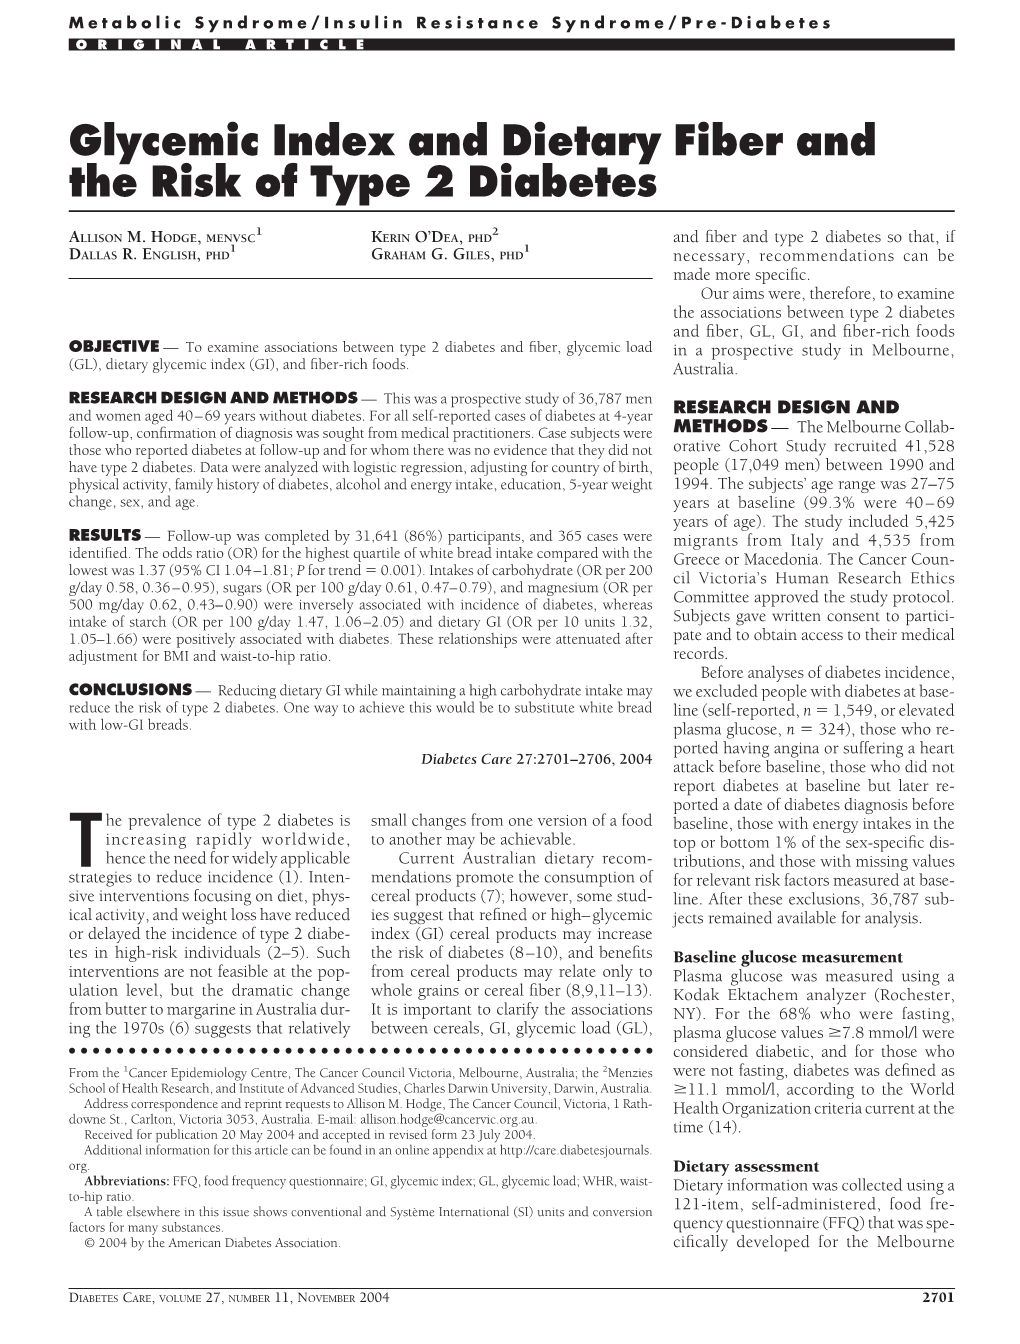 Glycemic Index and Dietary Fiber and the Risk of Type 2 Diabetes